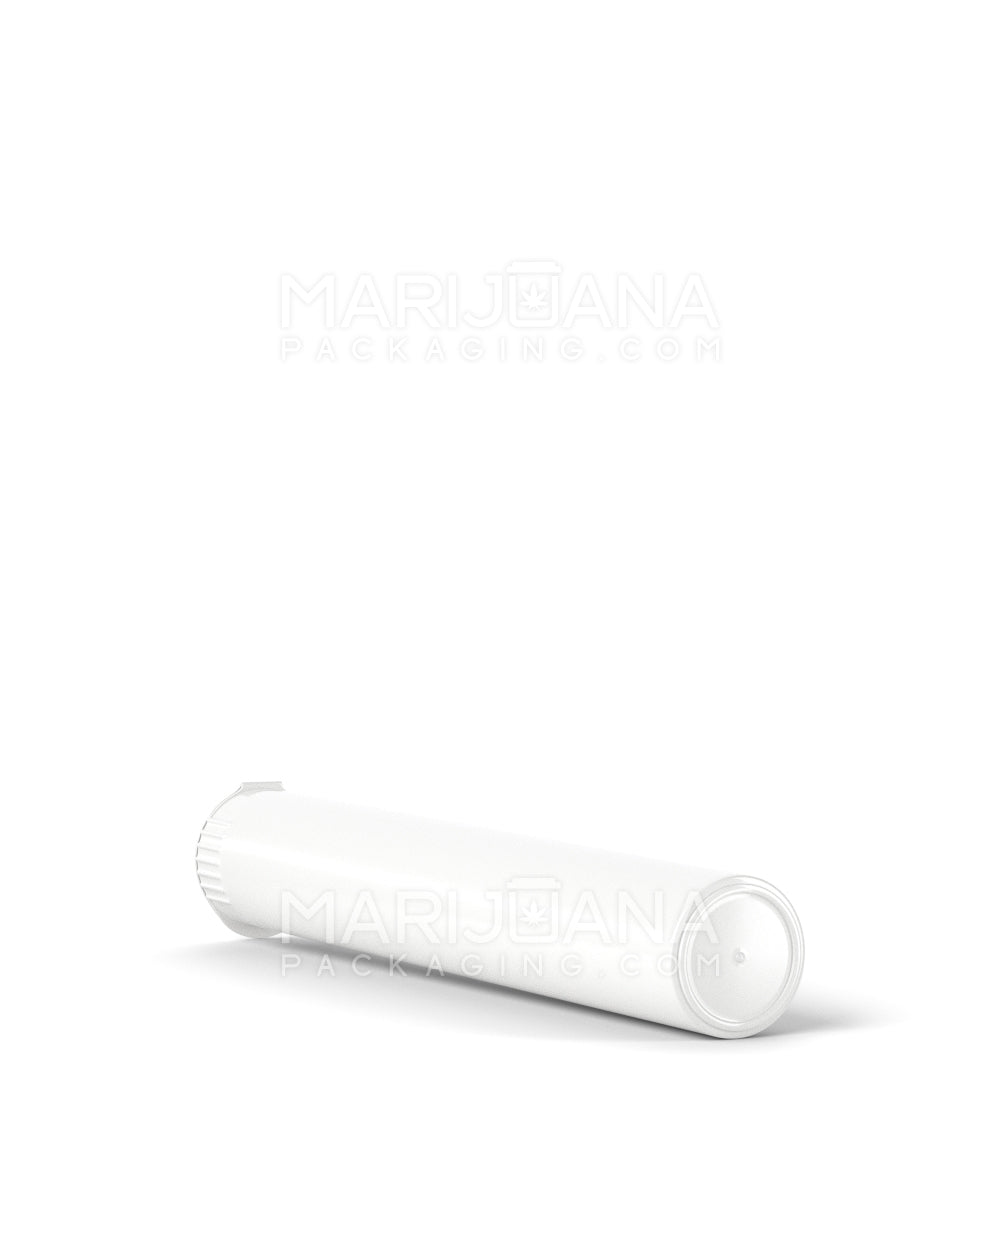 Child Resistant | King Size Pop Top Opaque Plastic PCR Pre-Roll Tubes (Open) | 116mm - White - 1000 Count - 6